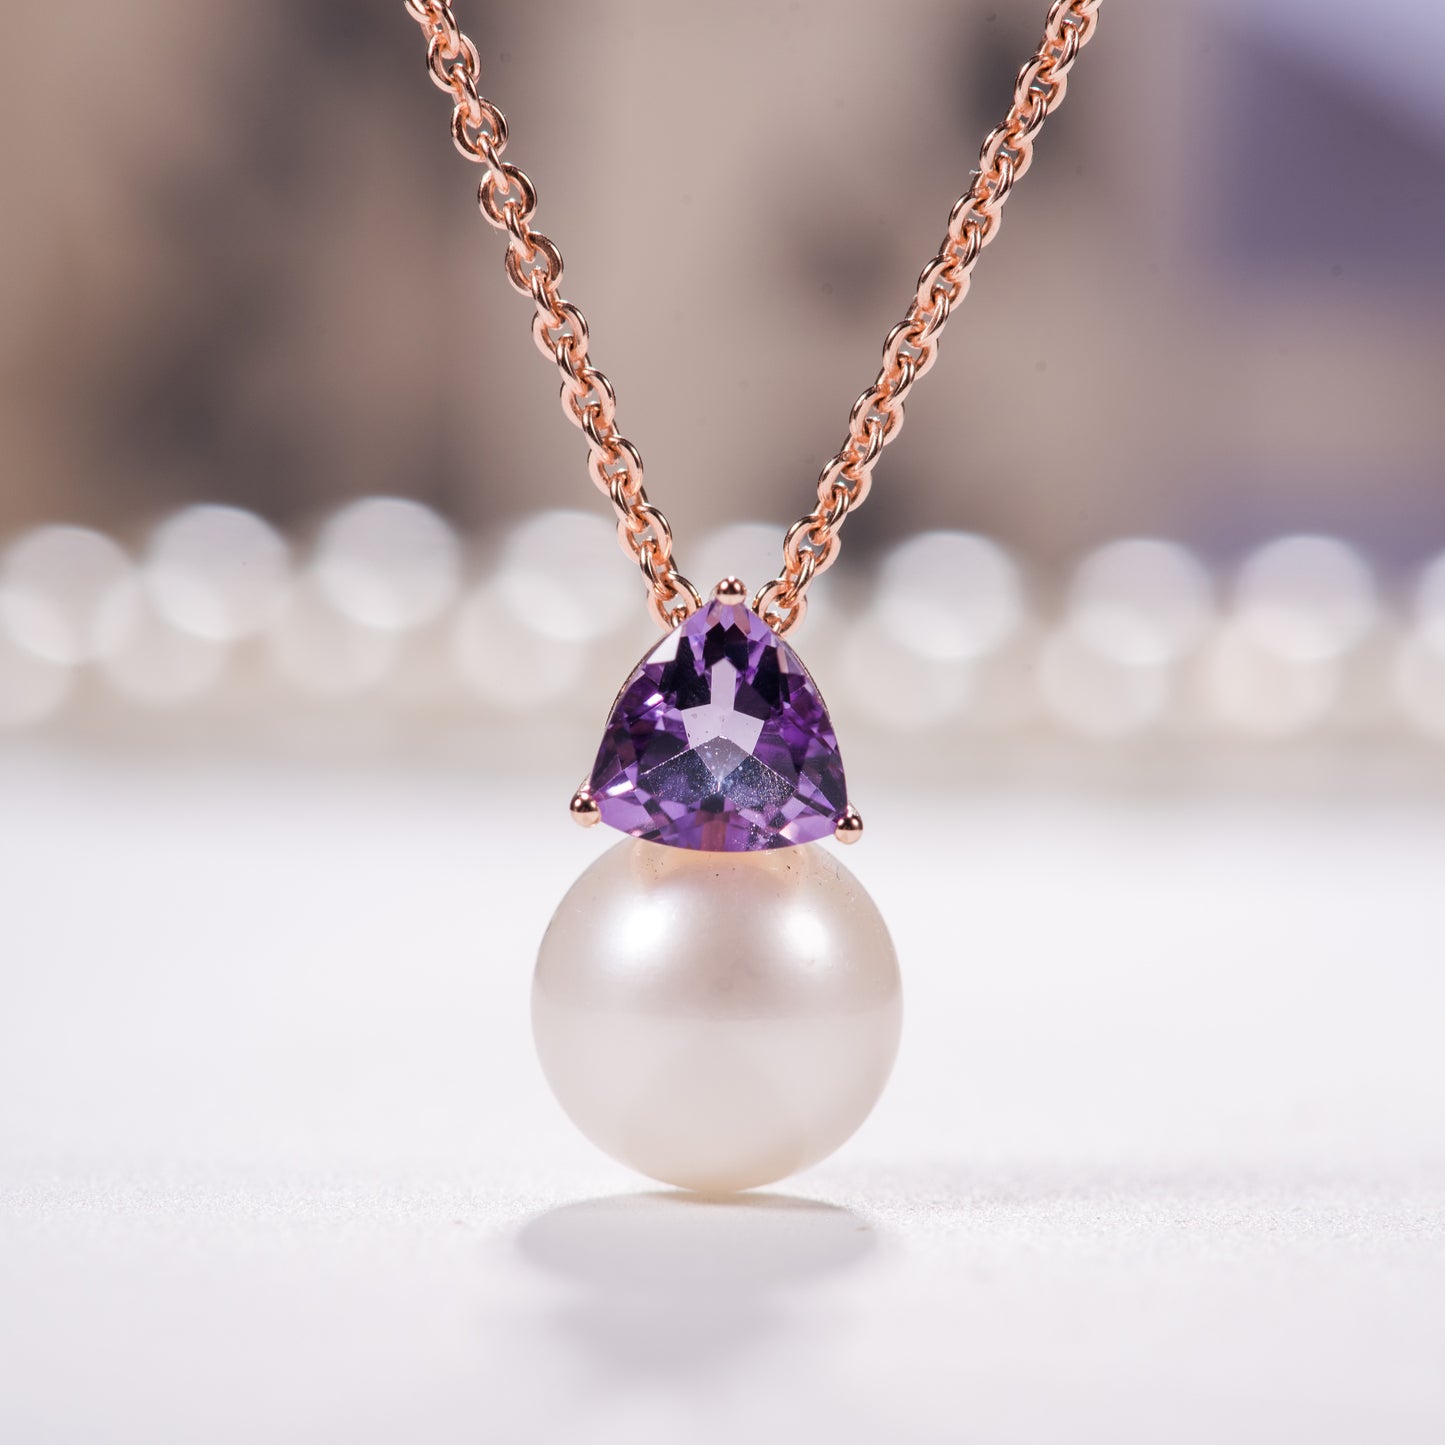 Pearl pendant with amethyst